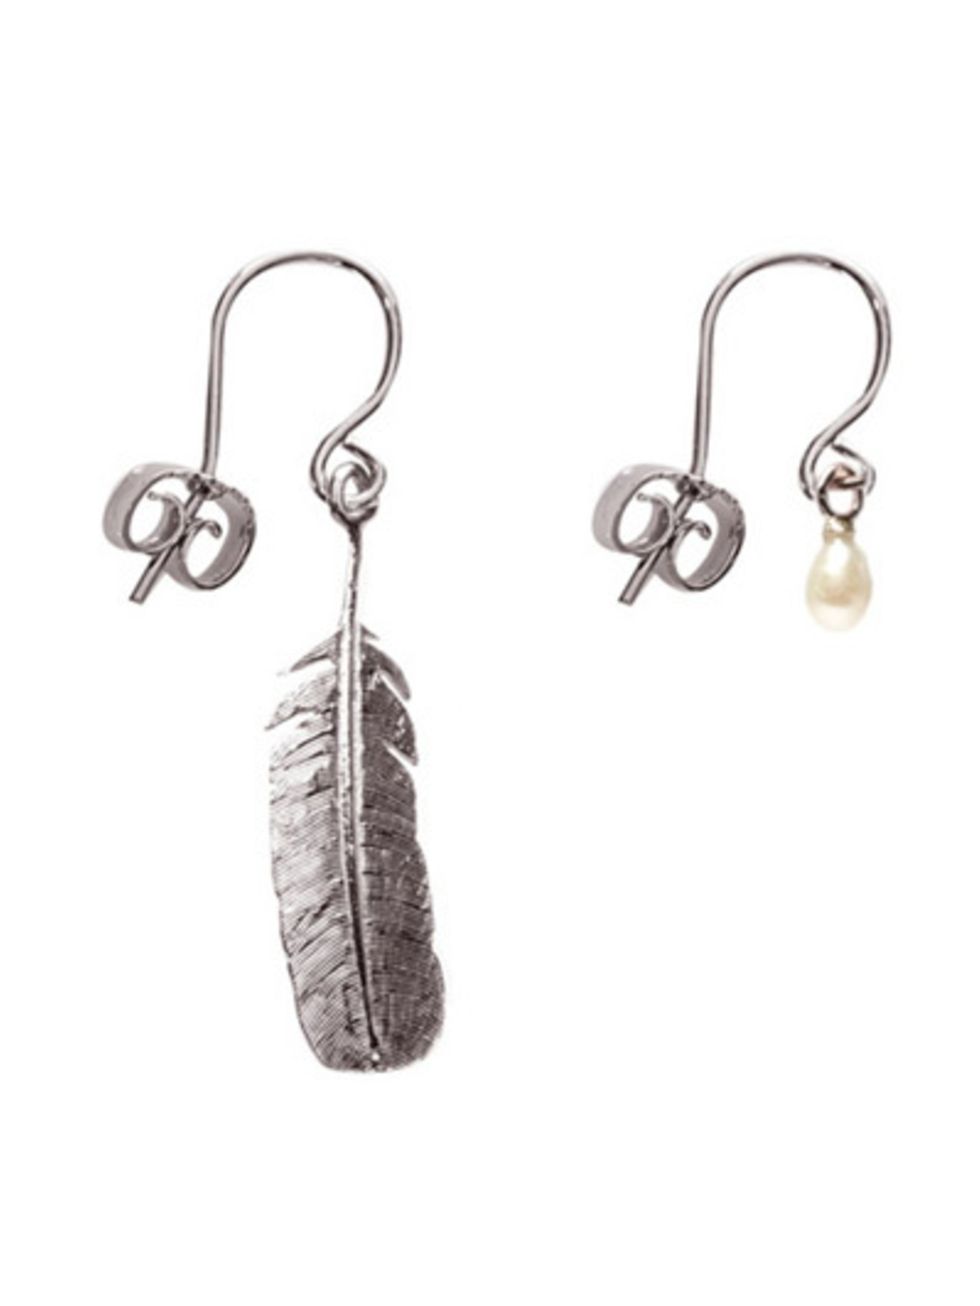 Product, Earrings, Style, Light, Organ, Metal, Natural material, Silver, Design, Craft, 